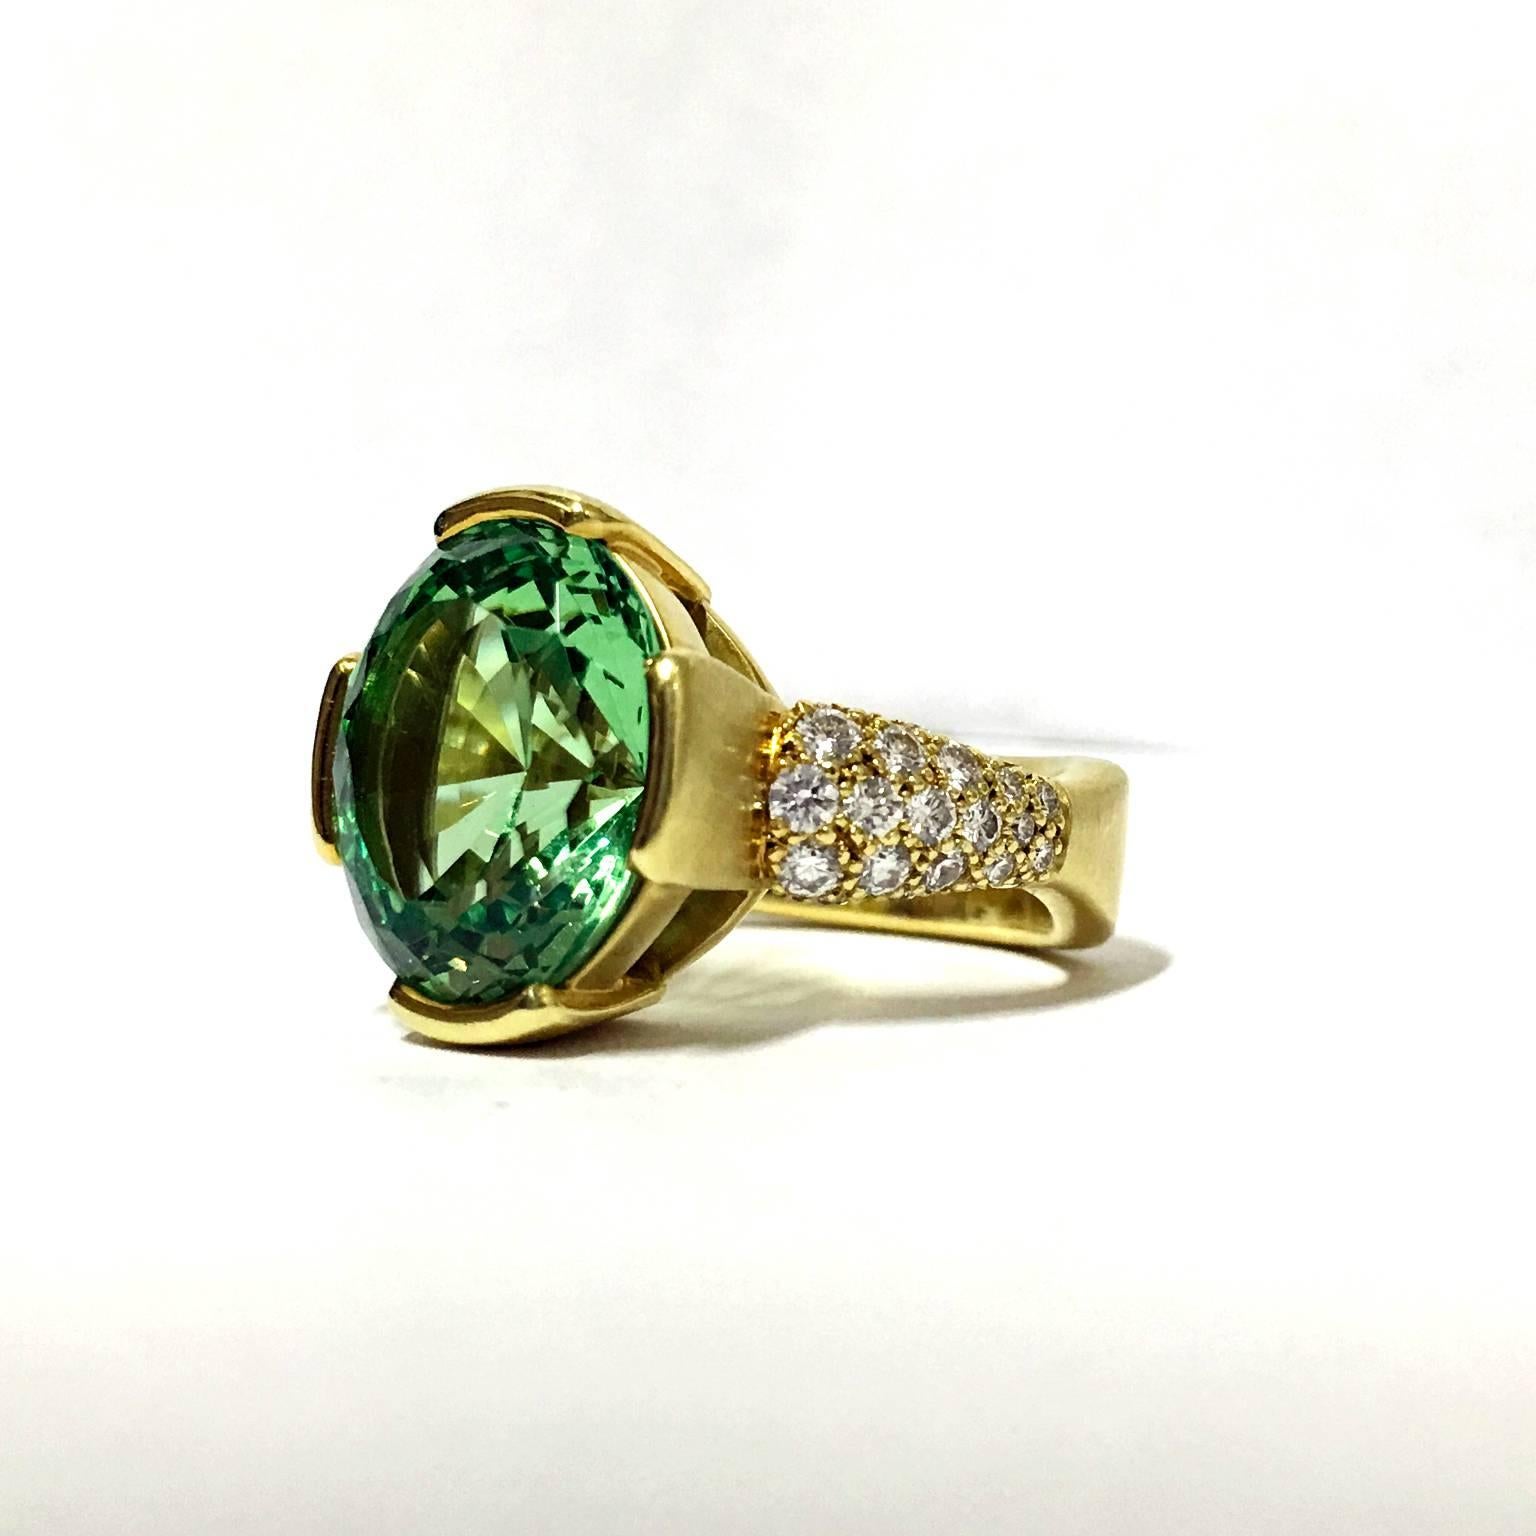 One-of-a-Kind Basket Ring handcrafted in satin-finished 18k yellow gold with a spectacular 9.68 carat faceted oval tsavorite (13mm x 11mm) and thirty round brilliant-cut F/vs1 diamonds totaling 0.77 carats. Size 6 (Can be Sized). 